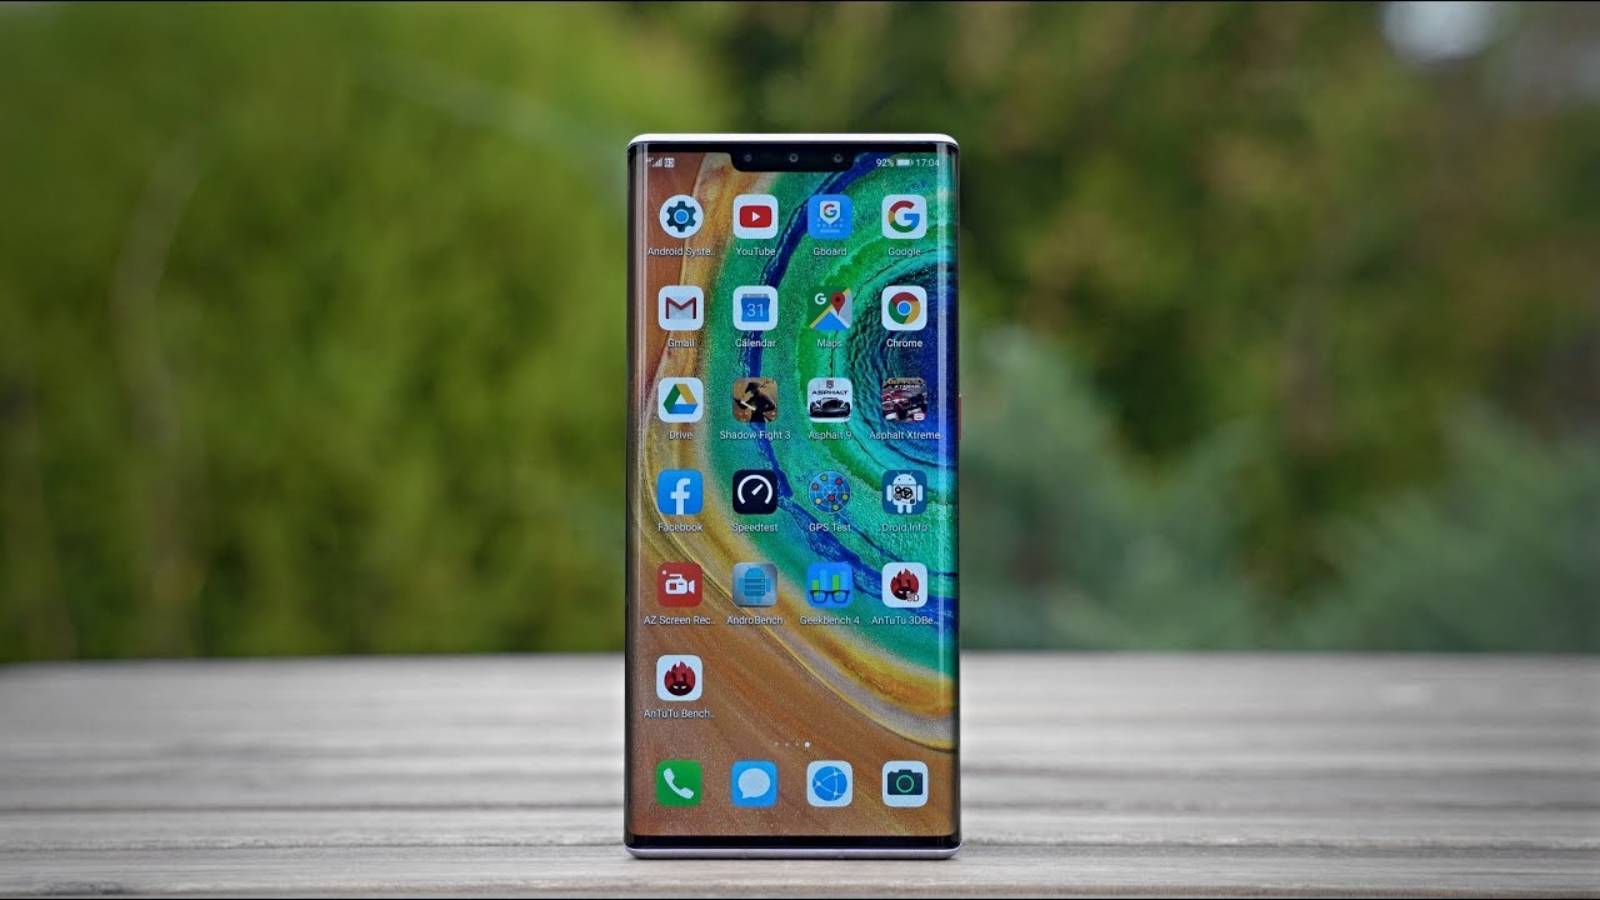 Huawei Mate 30 Pro news scares Apple